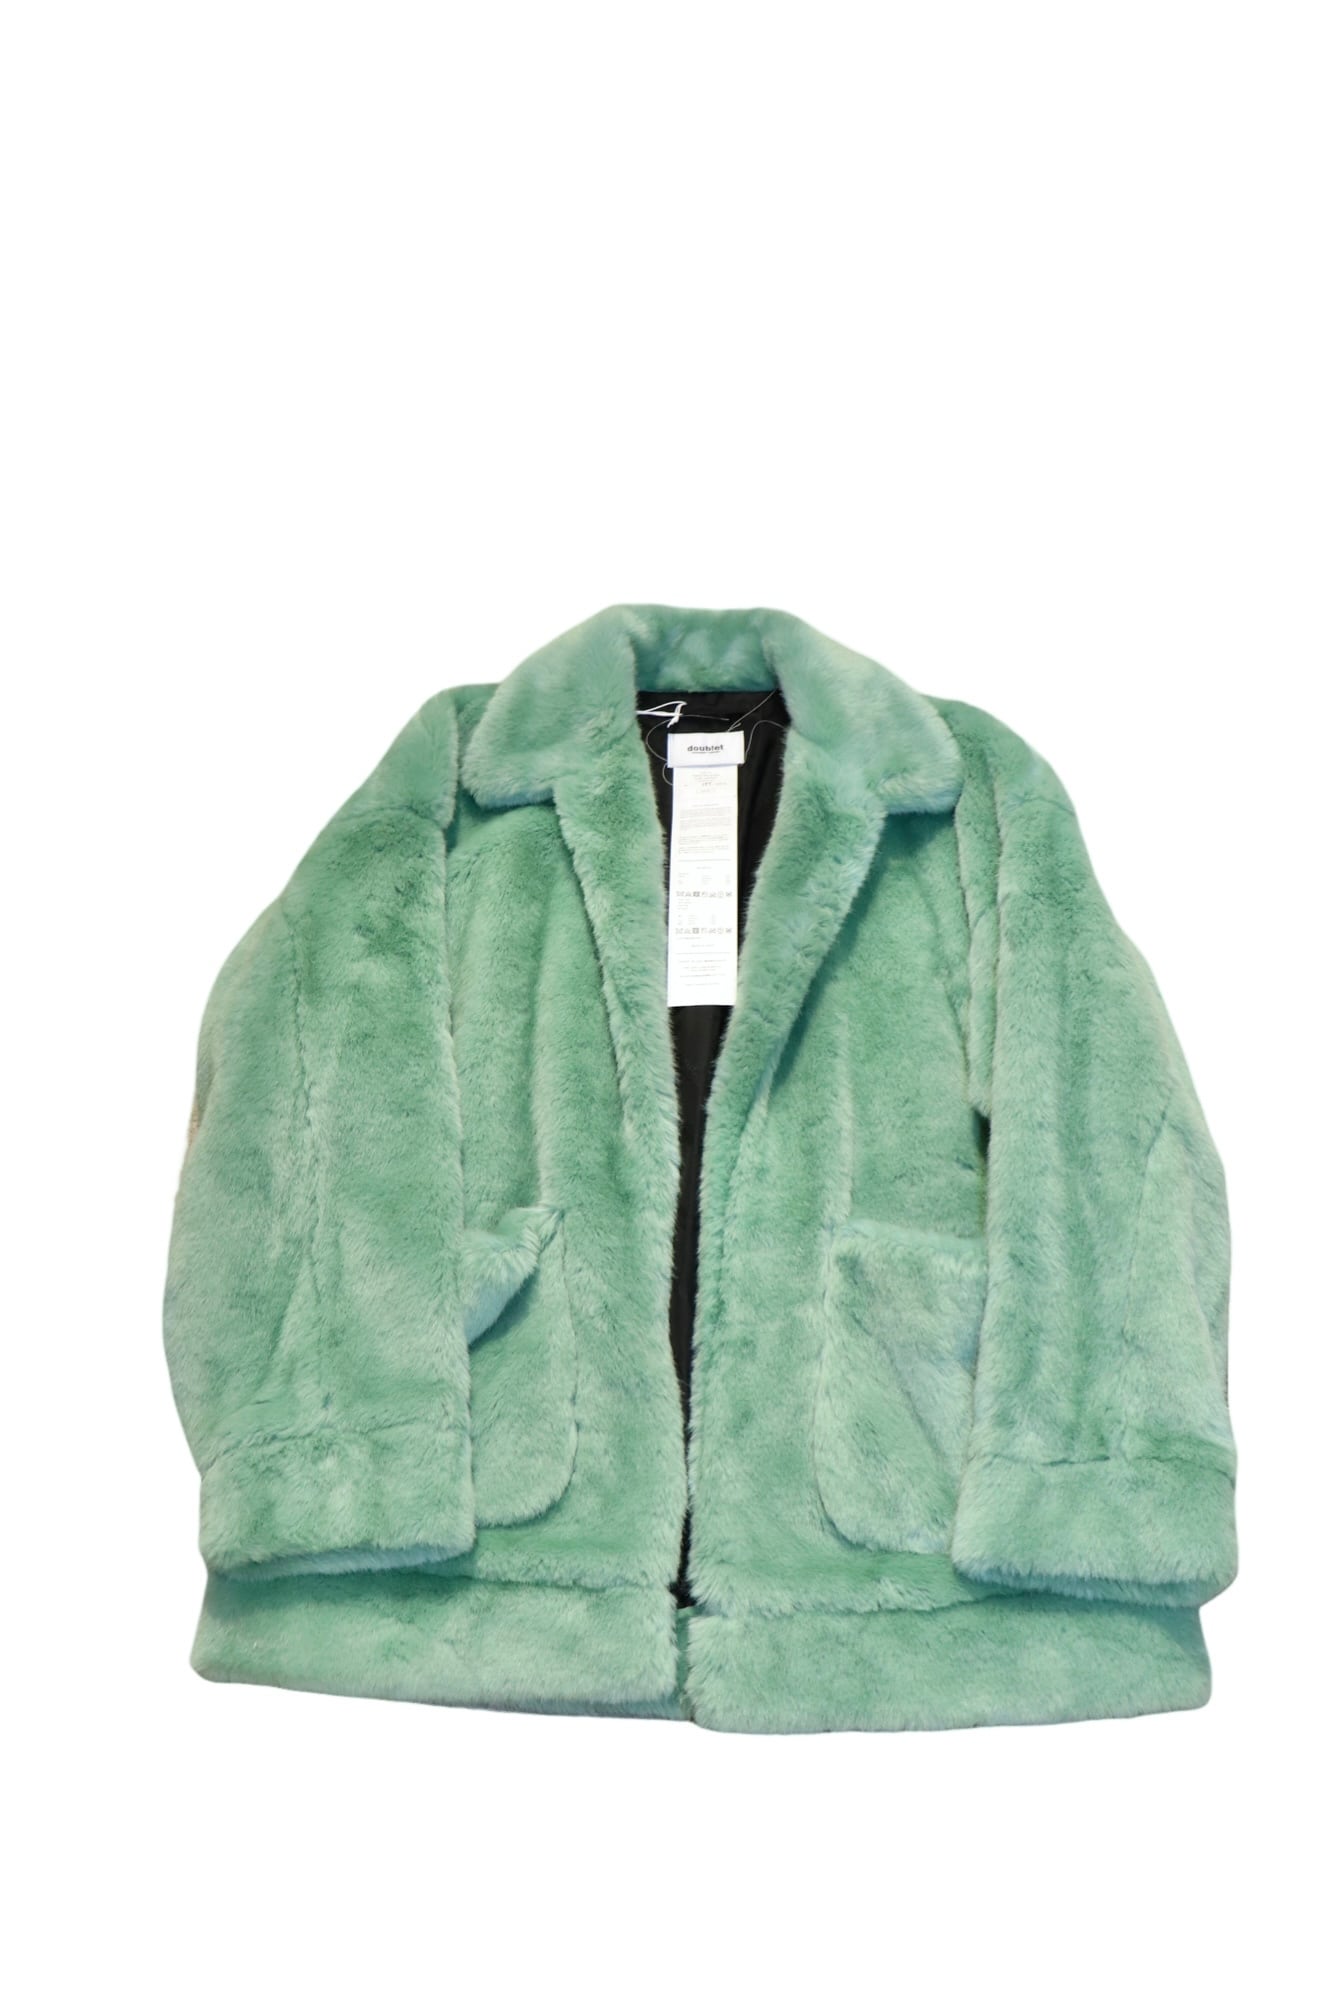 doublet HAND-PAINTED FUR JACKET (BLUE) 23AW05BL168 | IAAAM ONLINE